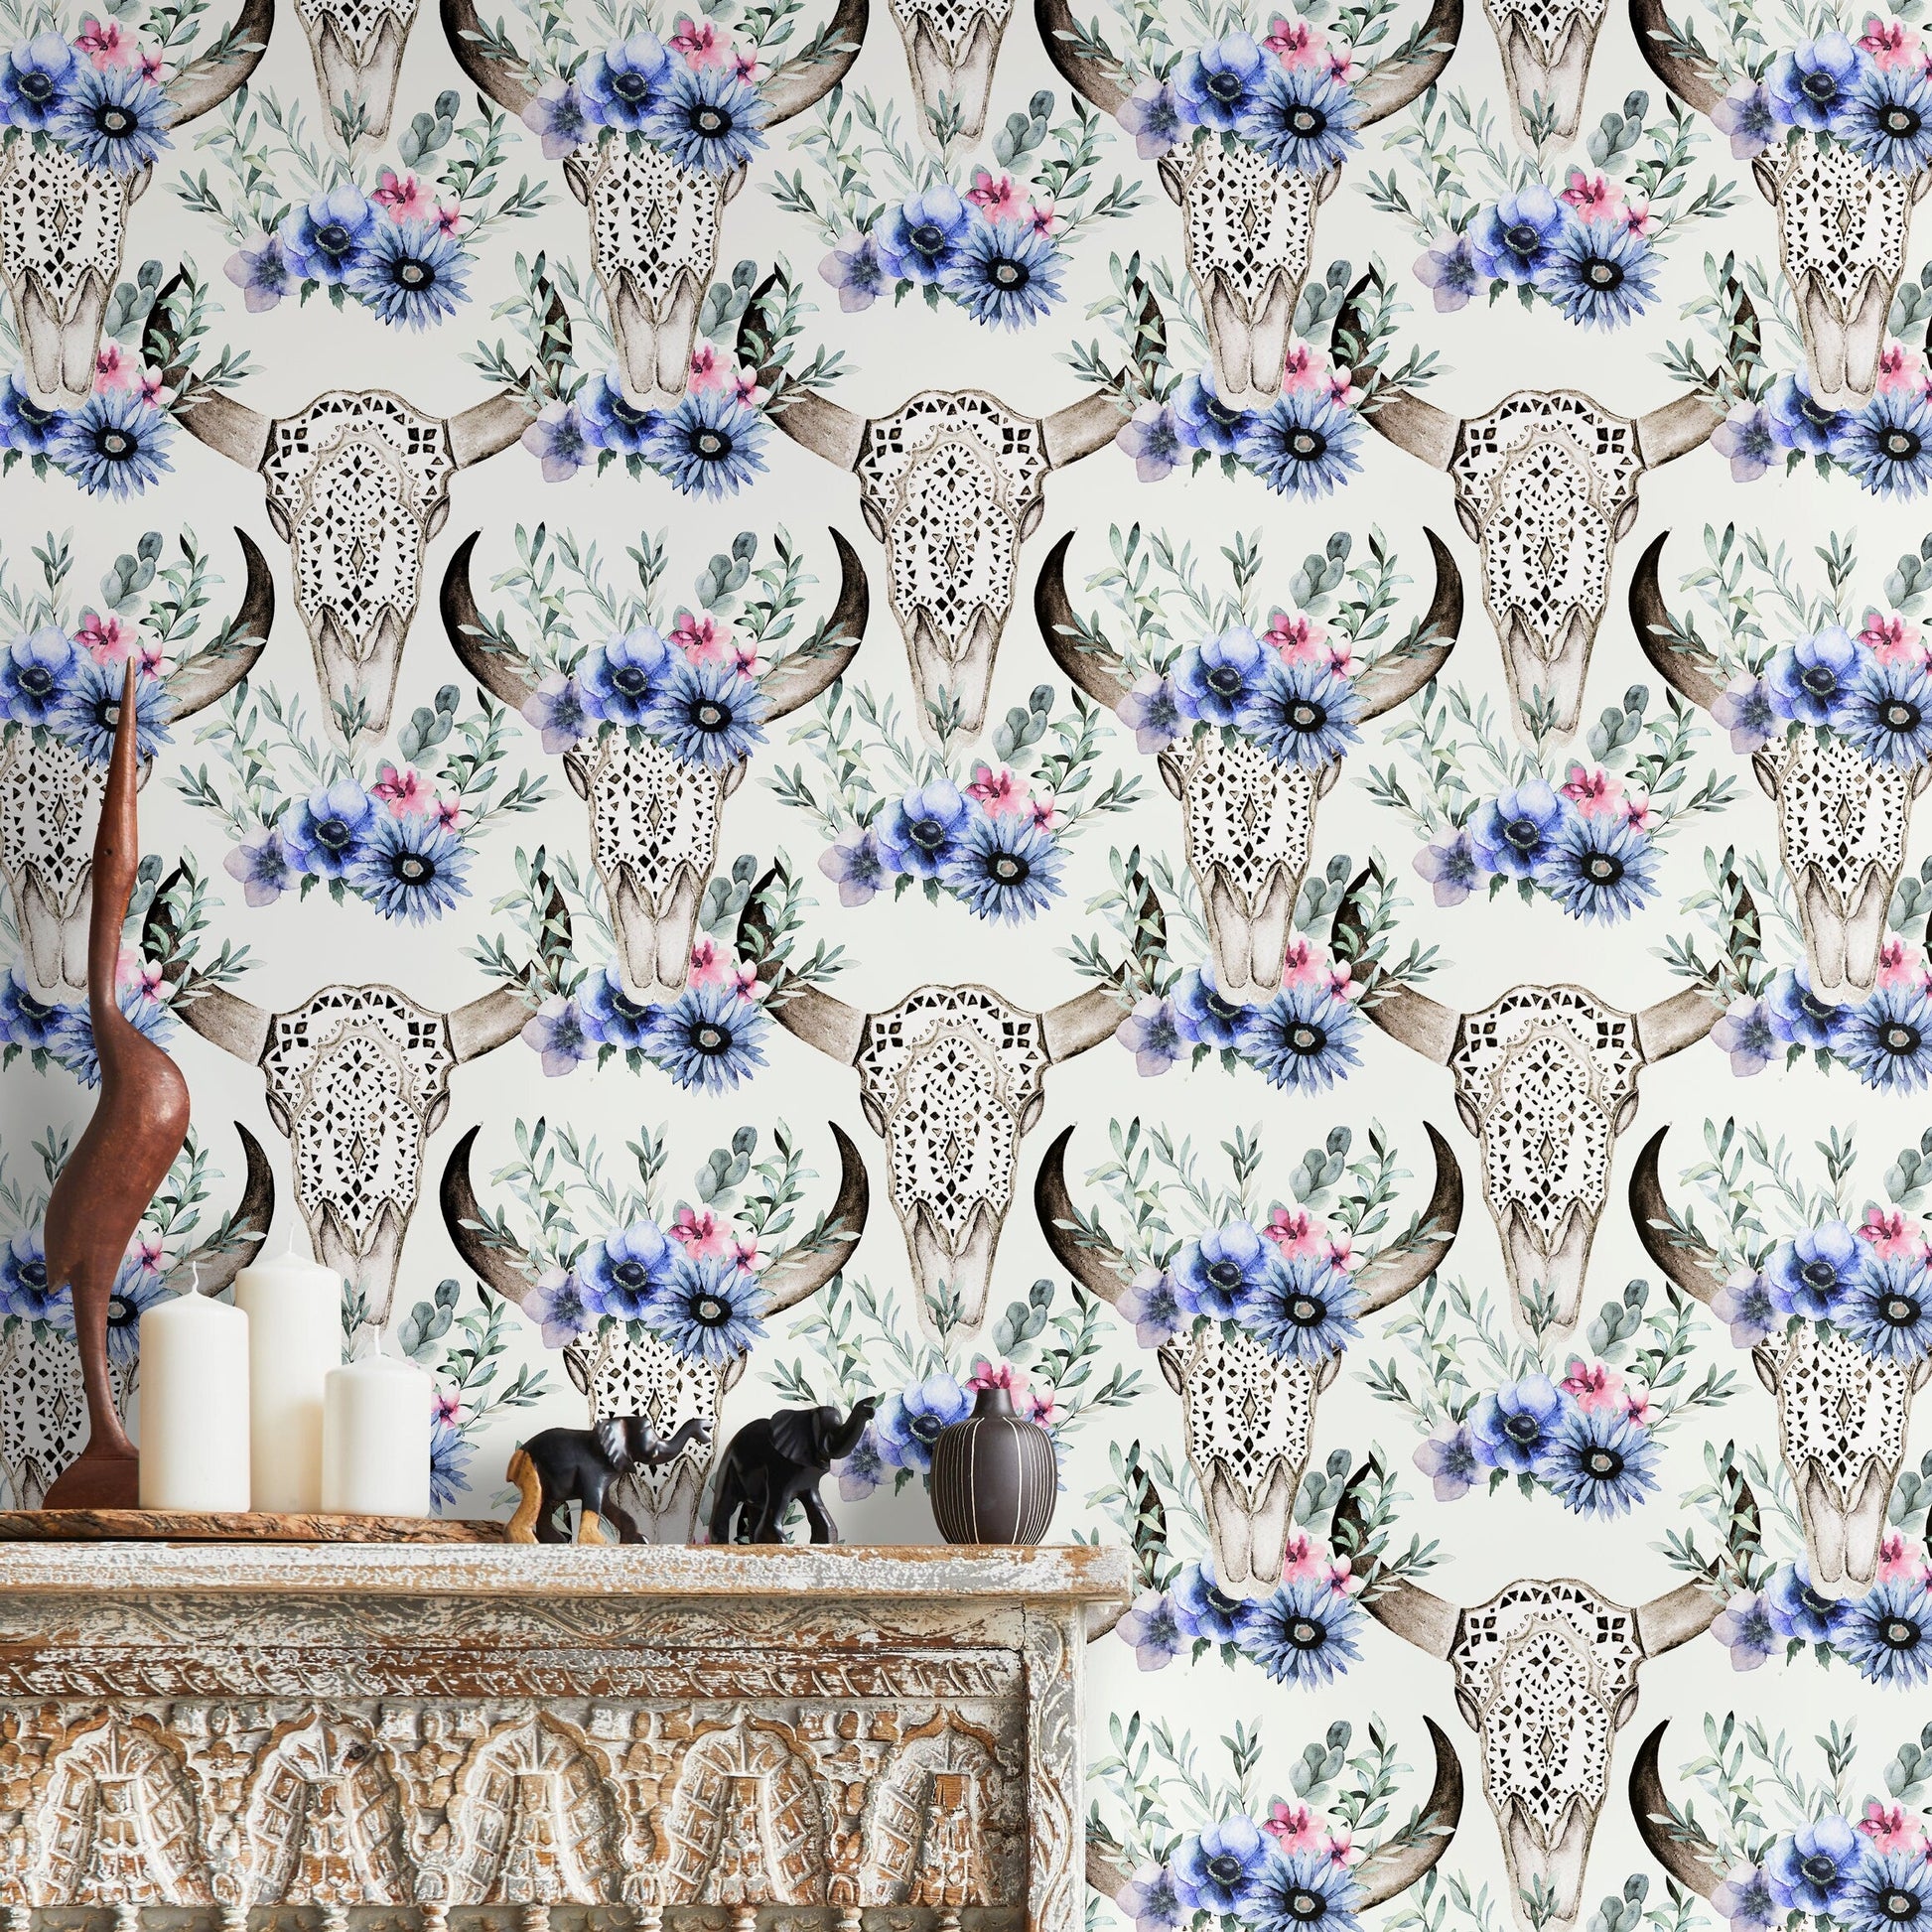 Vintage Floral Wallpaper Goat Skull Wallpaper Peel and Stick and Traditional Wallpaper - D926